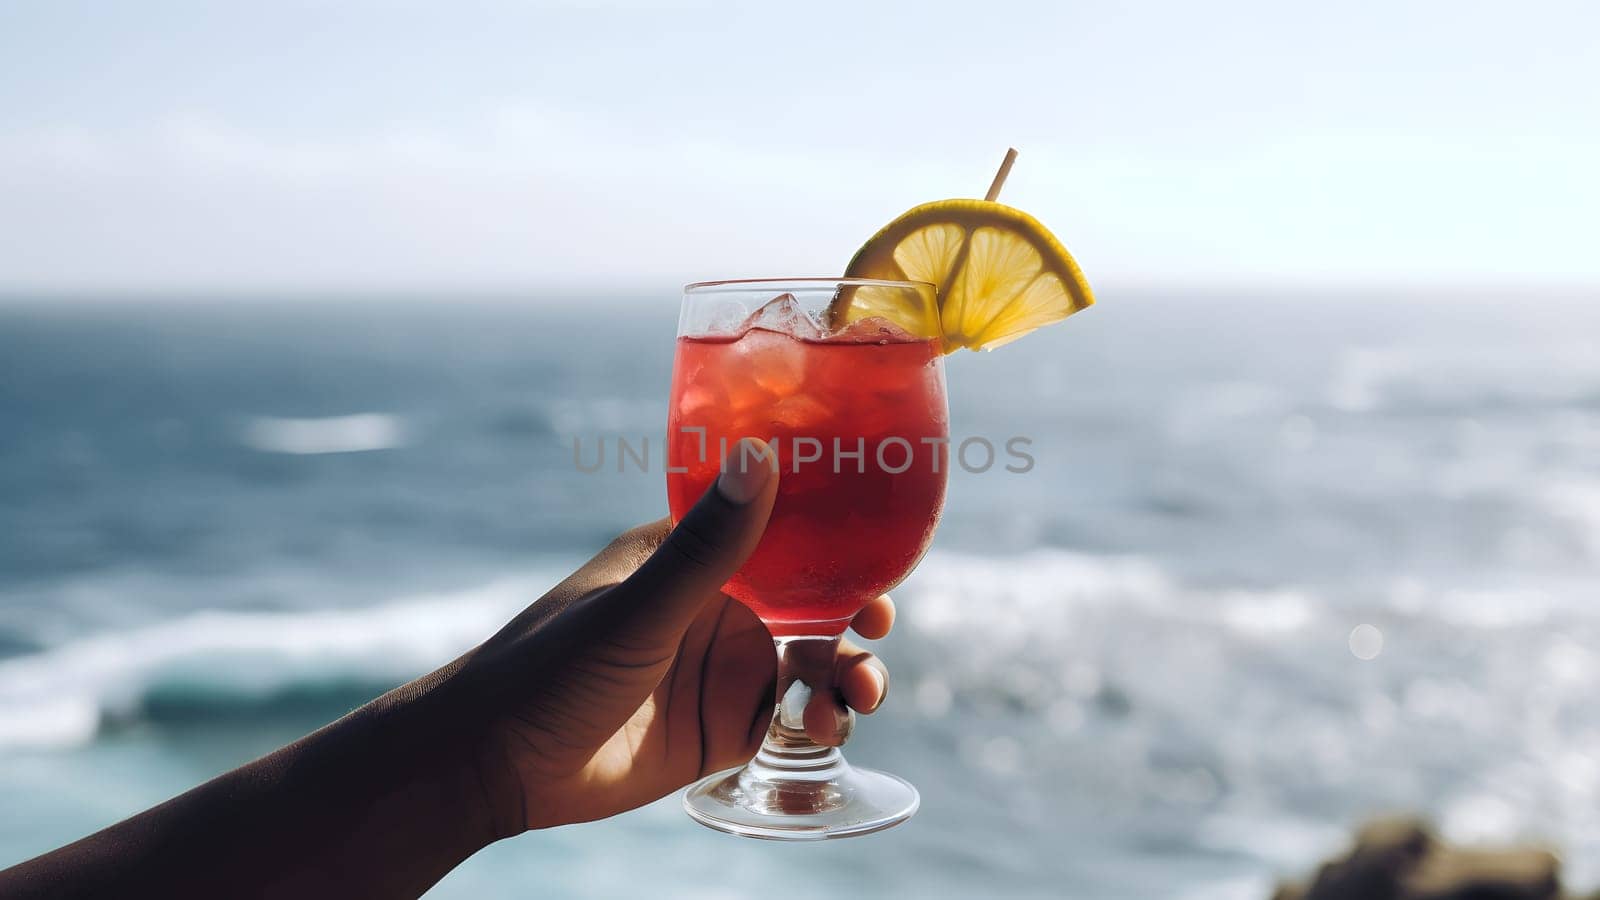 african american hand holding glass of cocktail on blurry sea horizon background at morning, neural network generated image by z1b